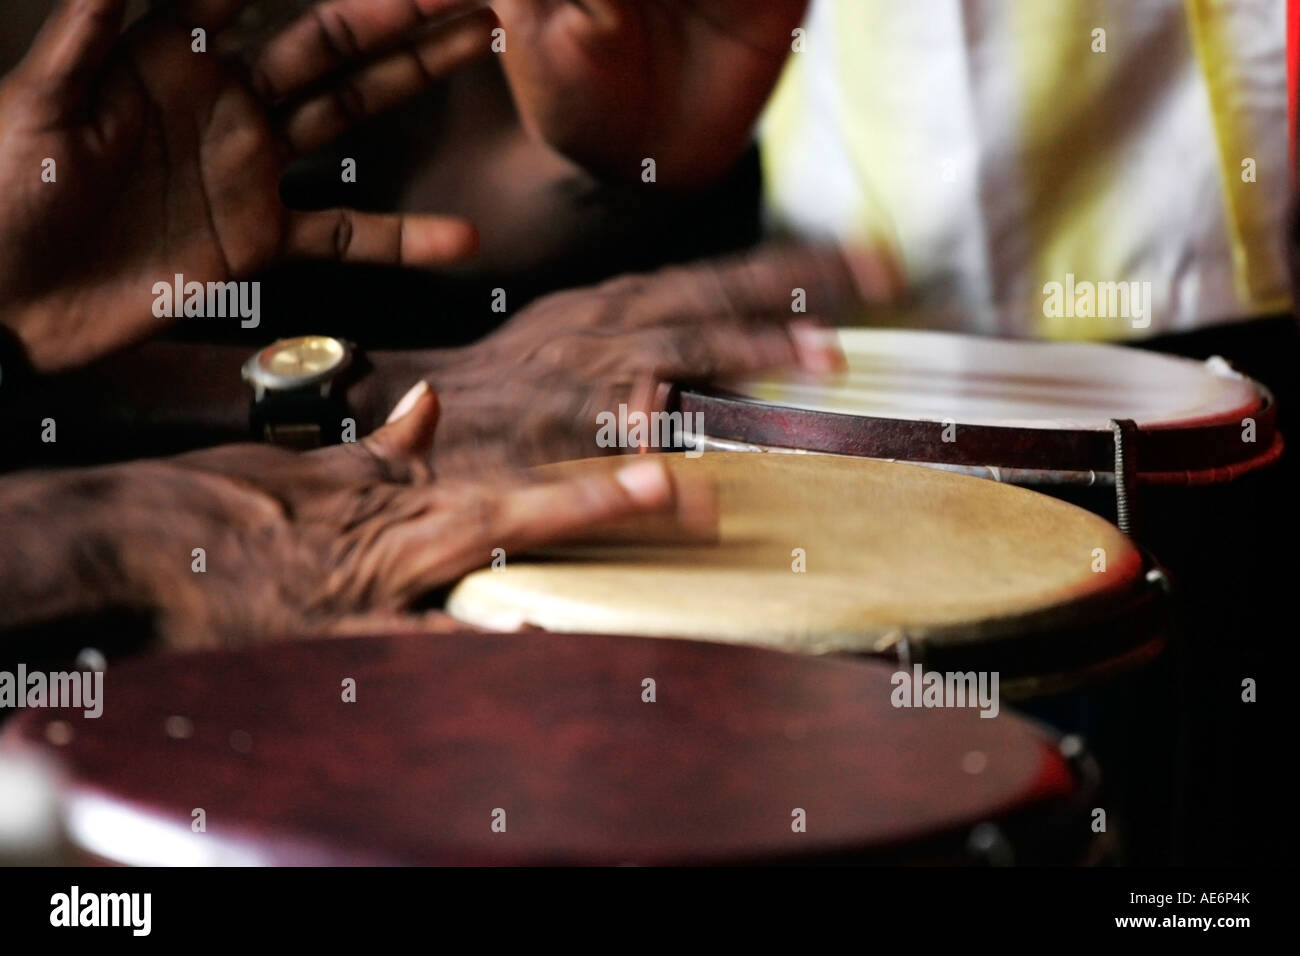 Percussionist's hands on drums Stock Photo